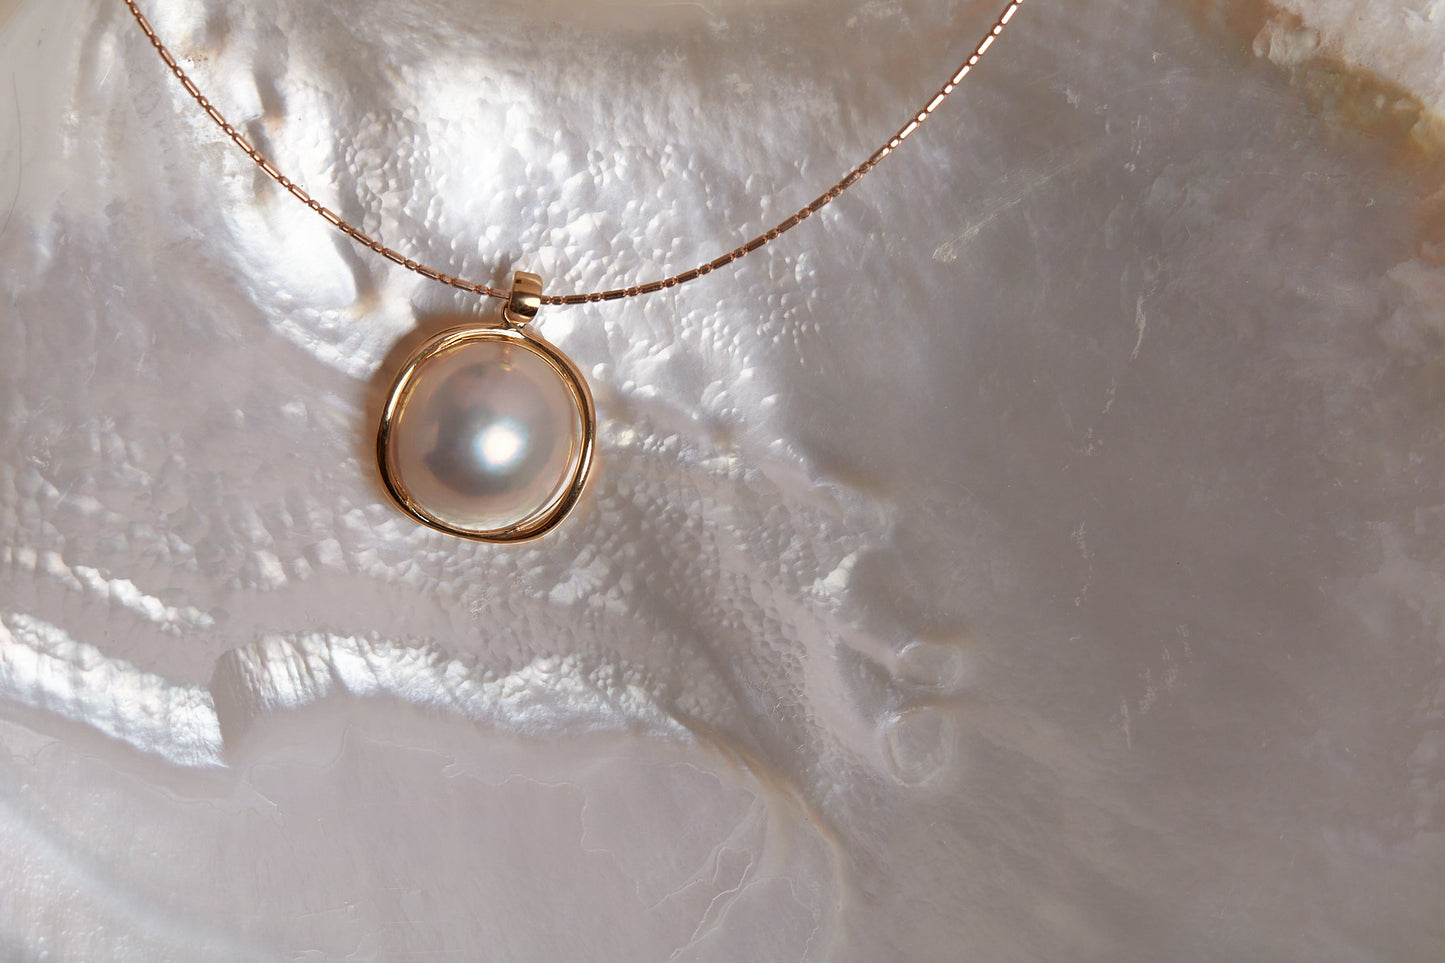 MABE SEA PEARL PENDANT WITH 18K YELLOW GOLD